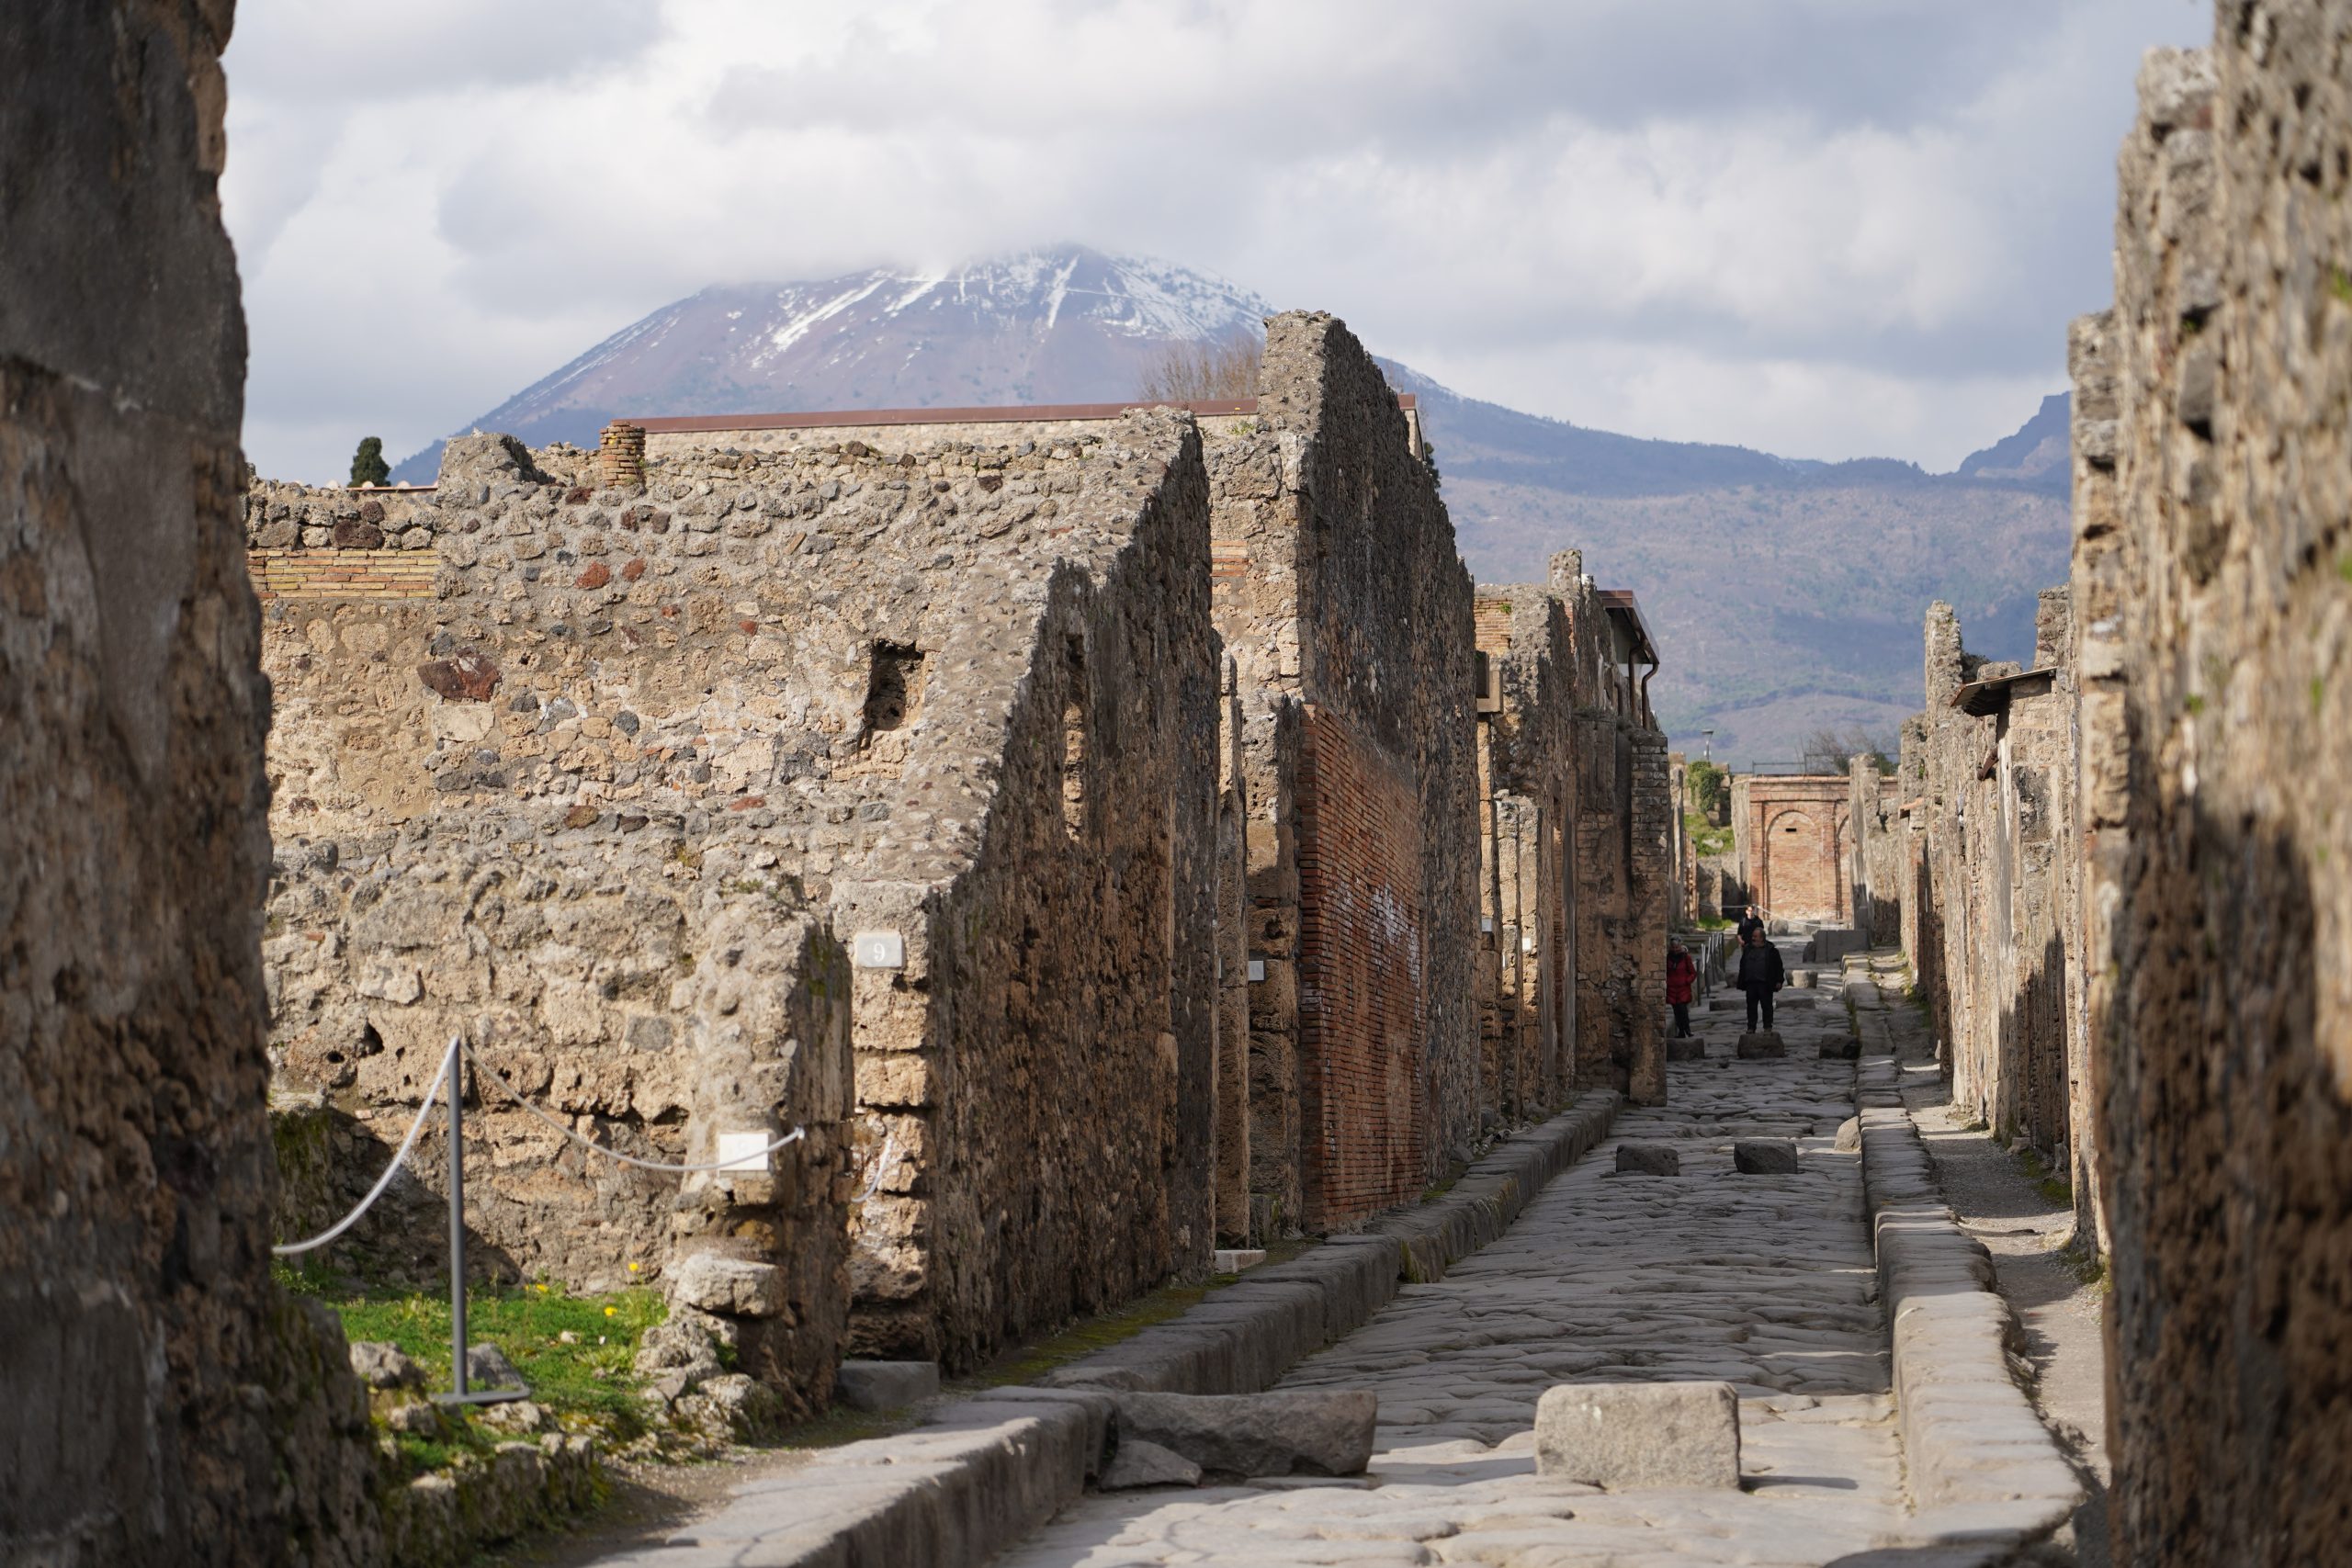 In AD 79, the city was destroyed and buried under several feet of volcanic ash and pumice when Mount Vesuvius erupted.